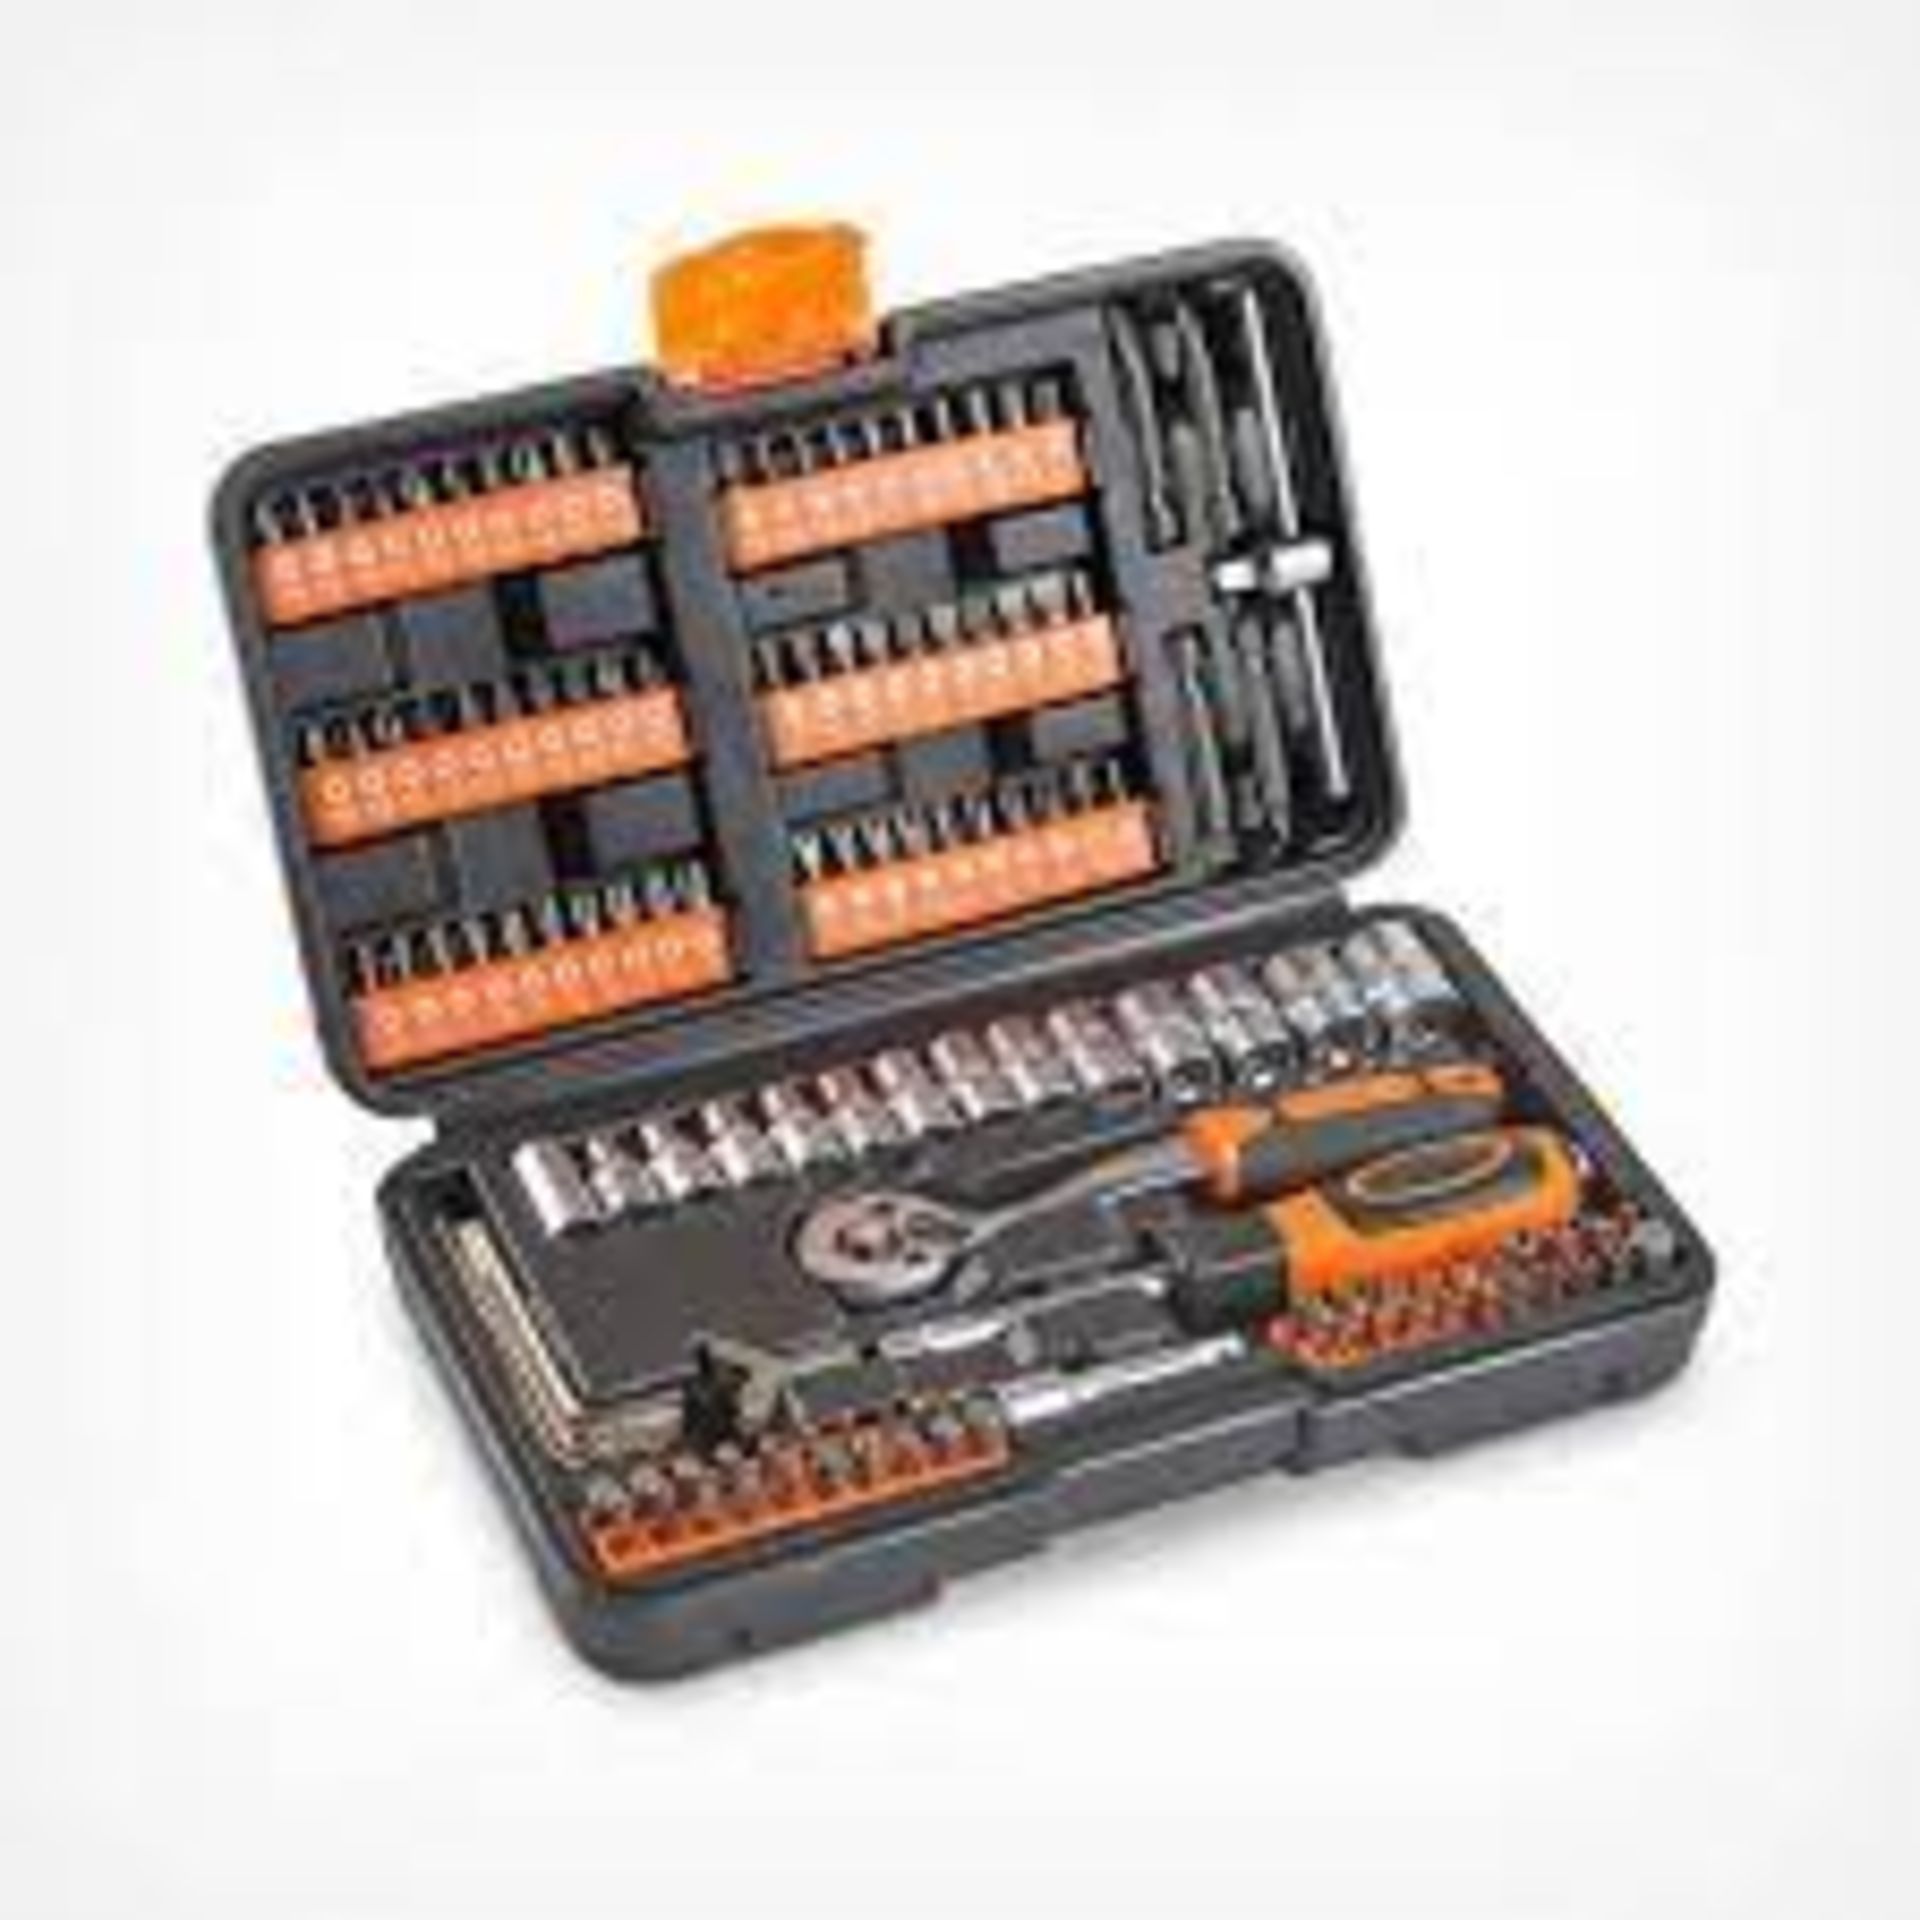 10 x New Boxed 130pc Socket + Bit Sets. (REF176-OFC) Be prepared for the unexpected with the 130pc